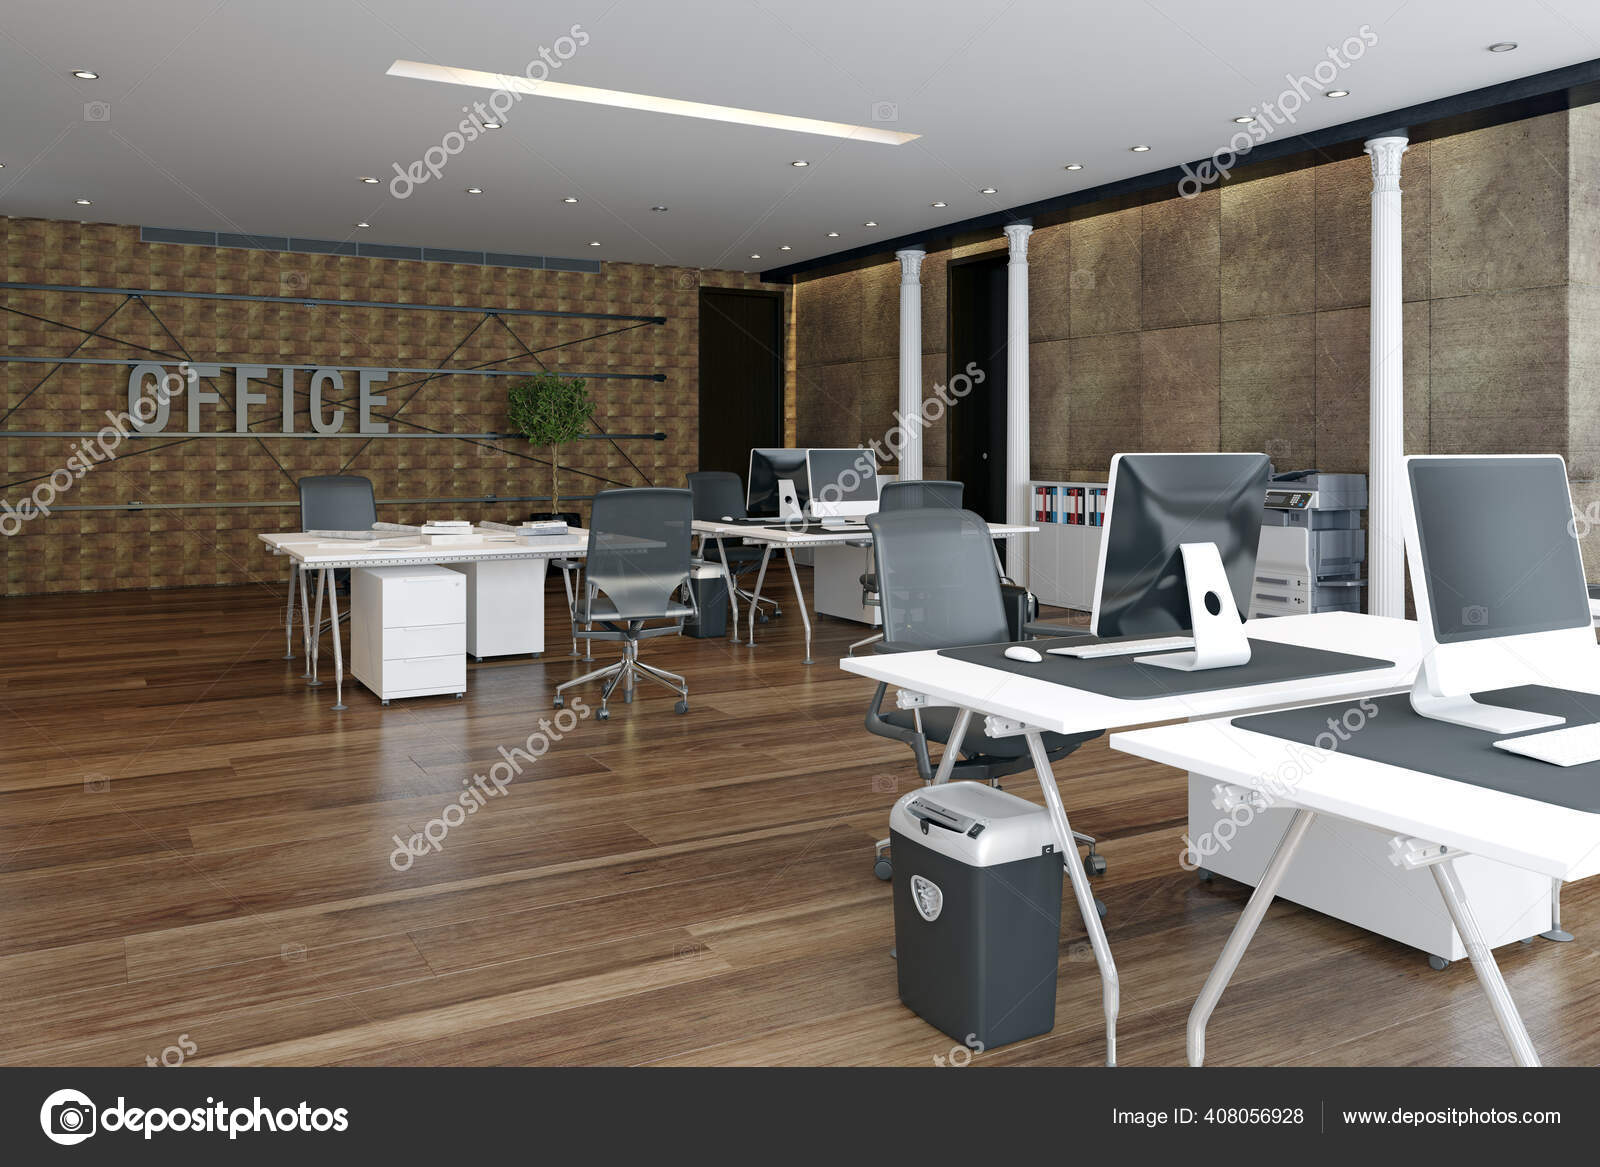 Barefoot office Stock Photos, Royalty Free Barefoot office Images |  Depositphotos